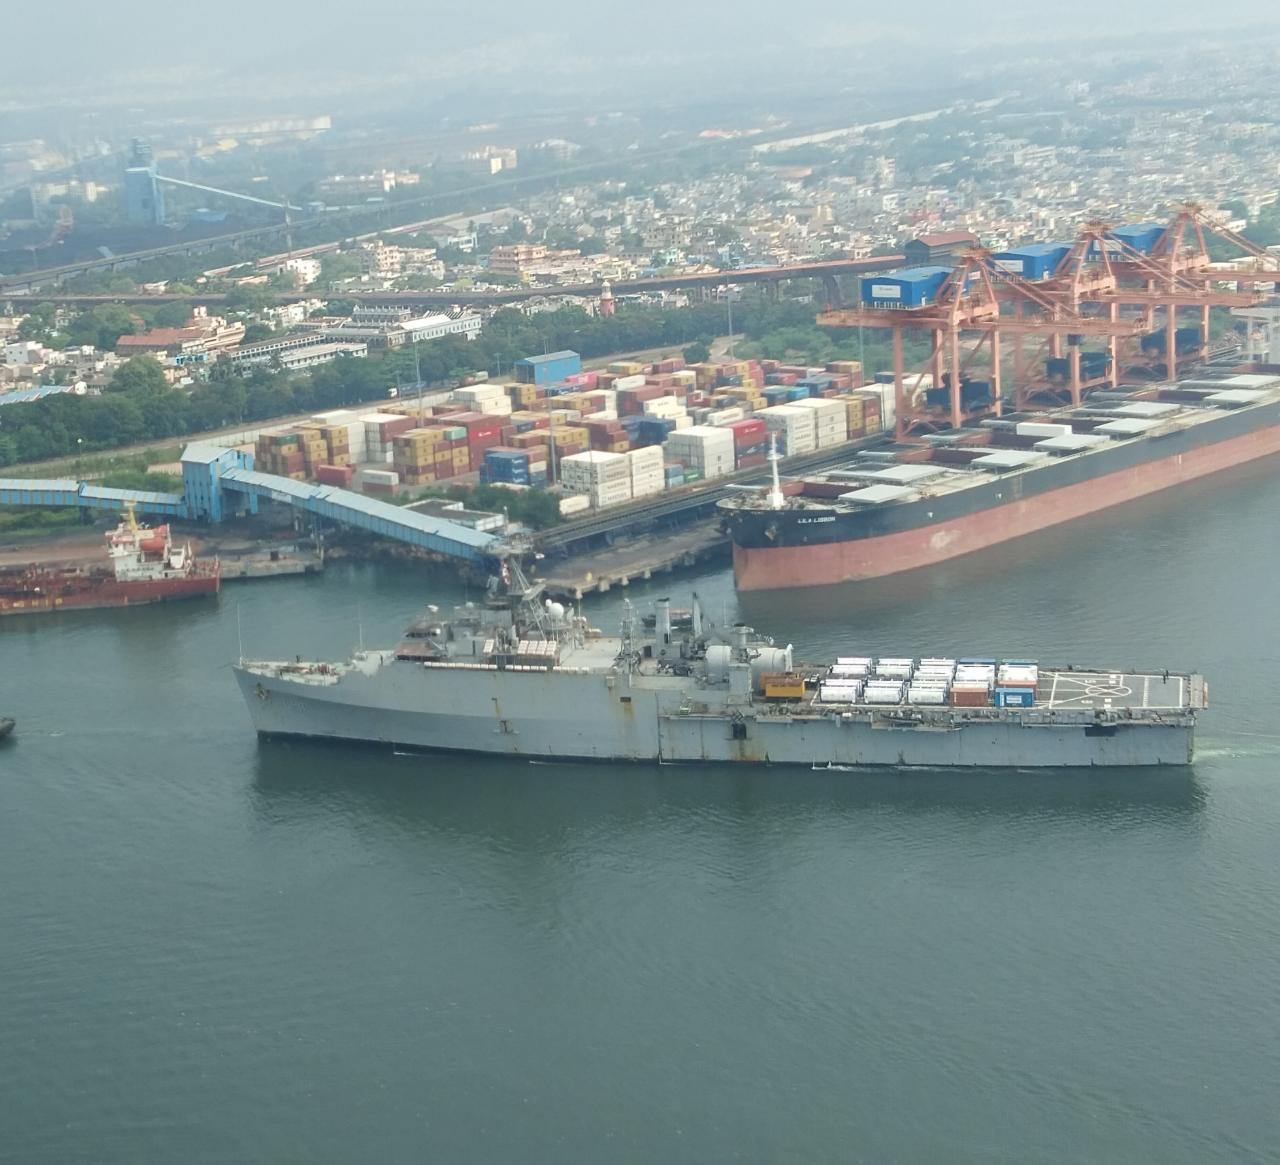 Operation Samudra Setu II -  INS Jalashwa Arrives Visakhapatnam with Critical COVID Relief Consignment Including Oxygen Cylinders and Ventilators from Brunei and Singapore